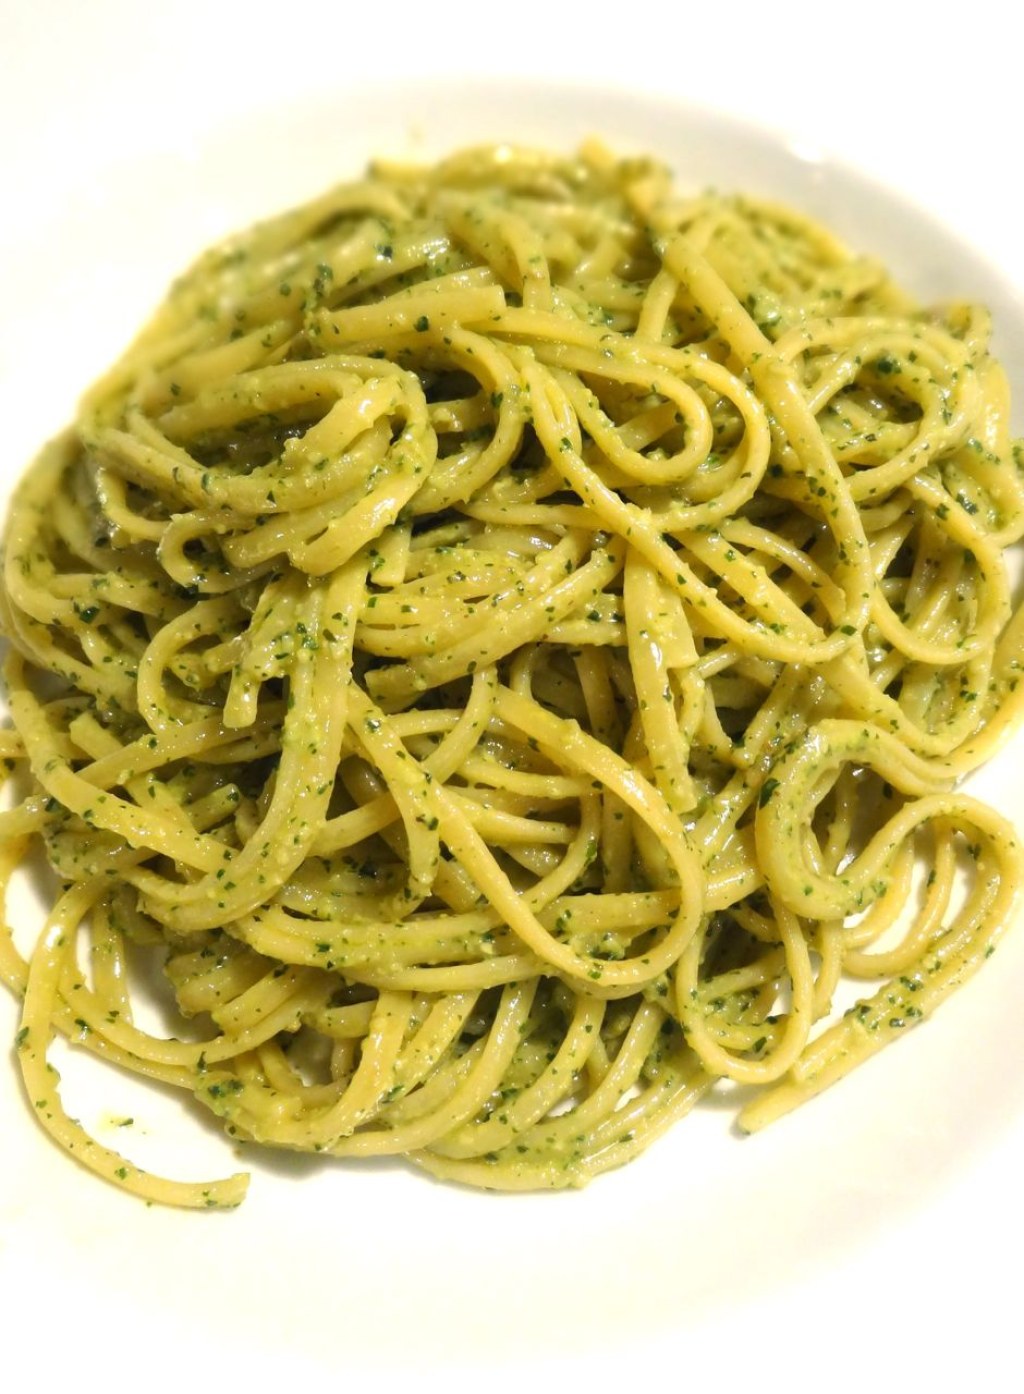 Picture of: Scrumpdillyicious: Silver Palate: Linguine with Basil & Walnut Pesto